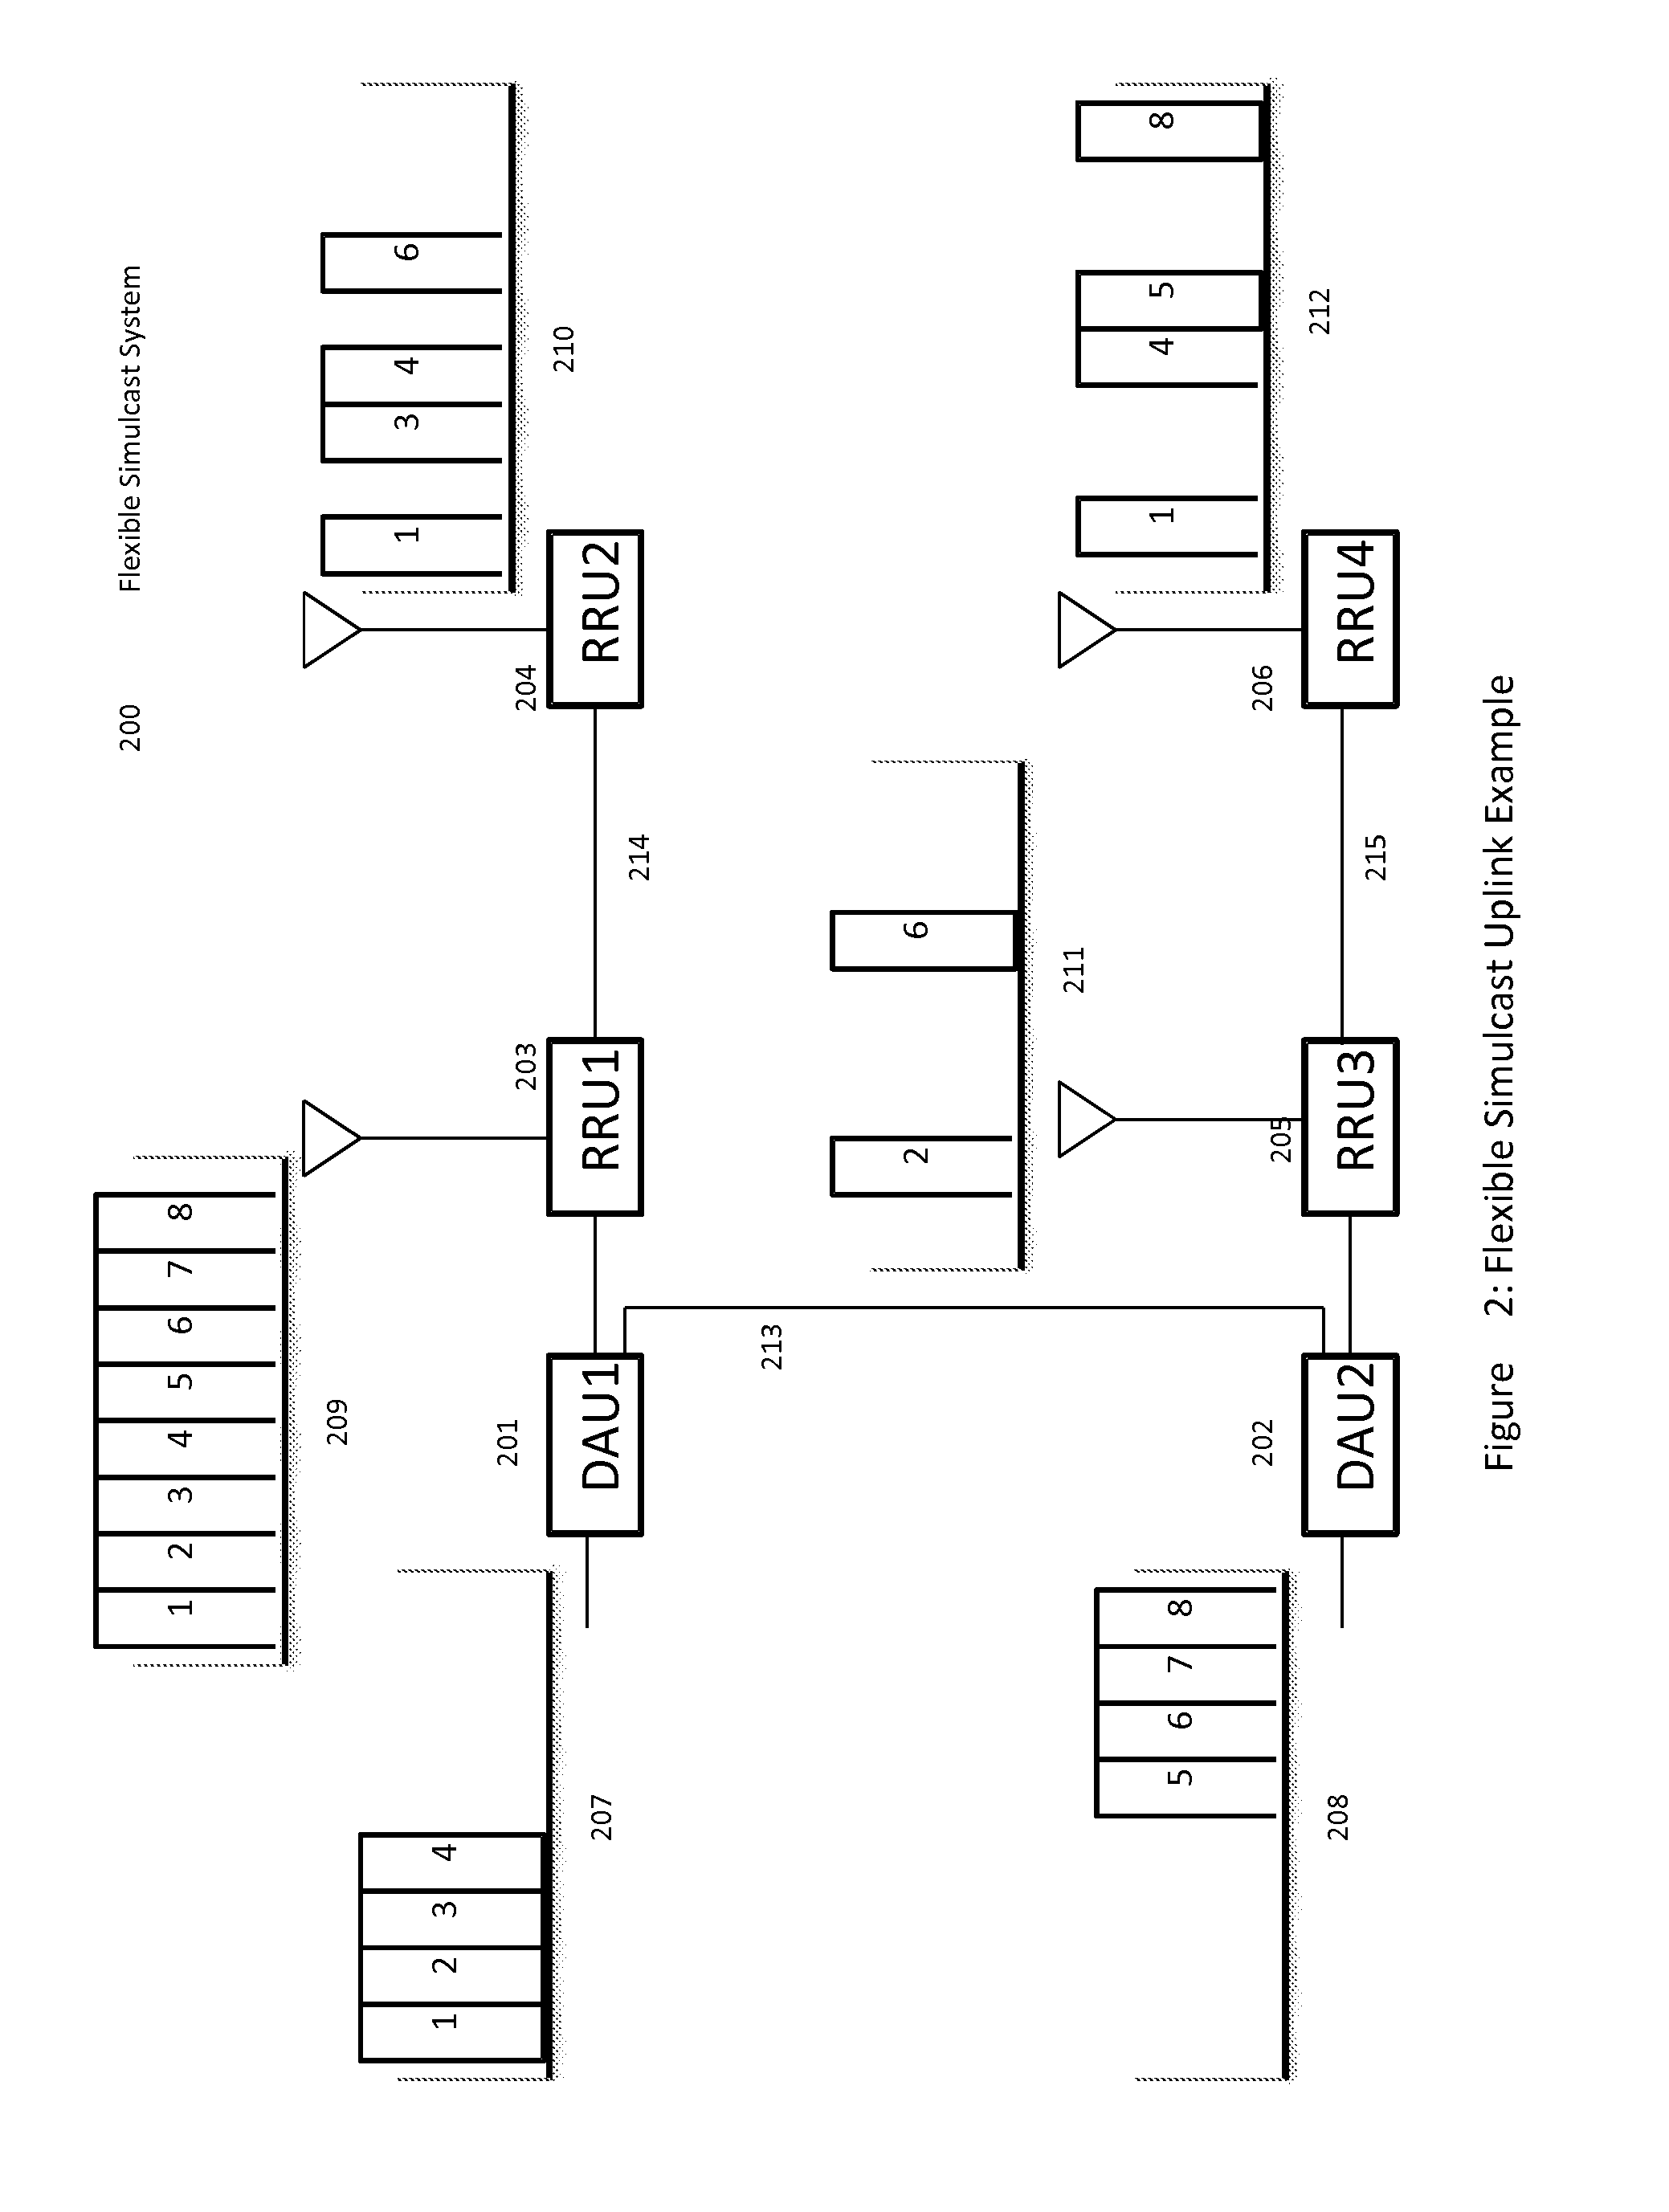 Remotely reconfigurable distributed antenna system and methods